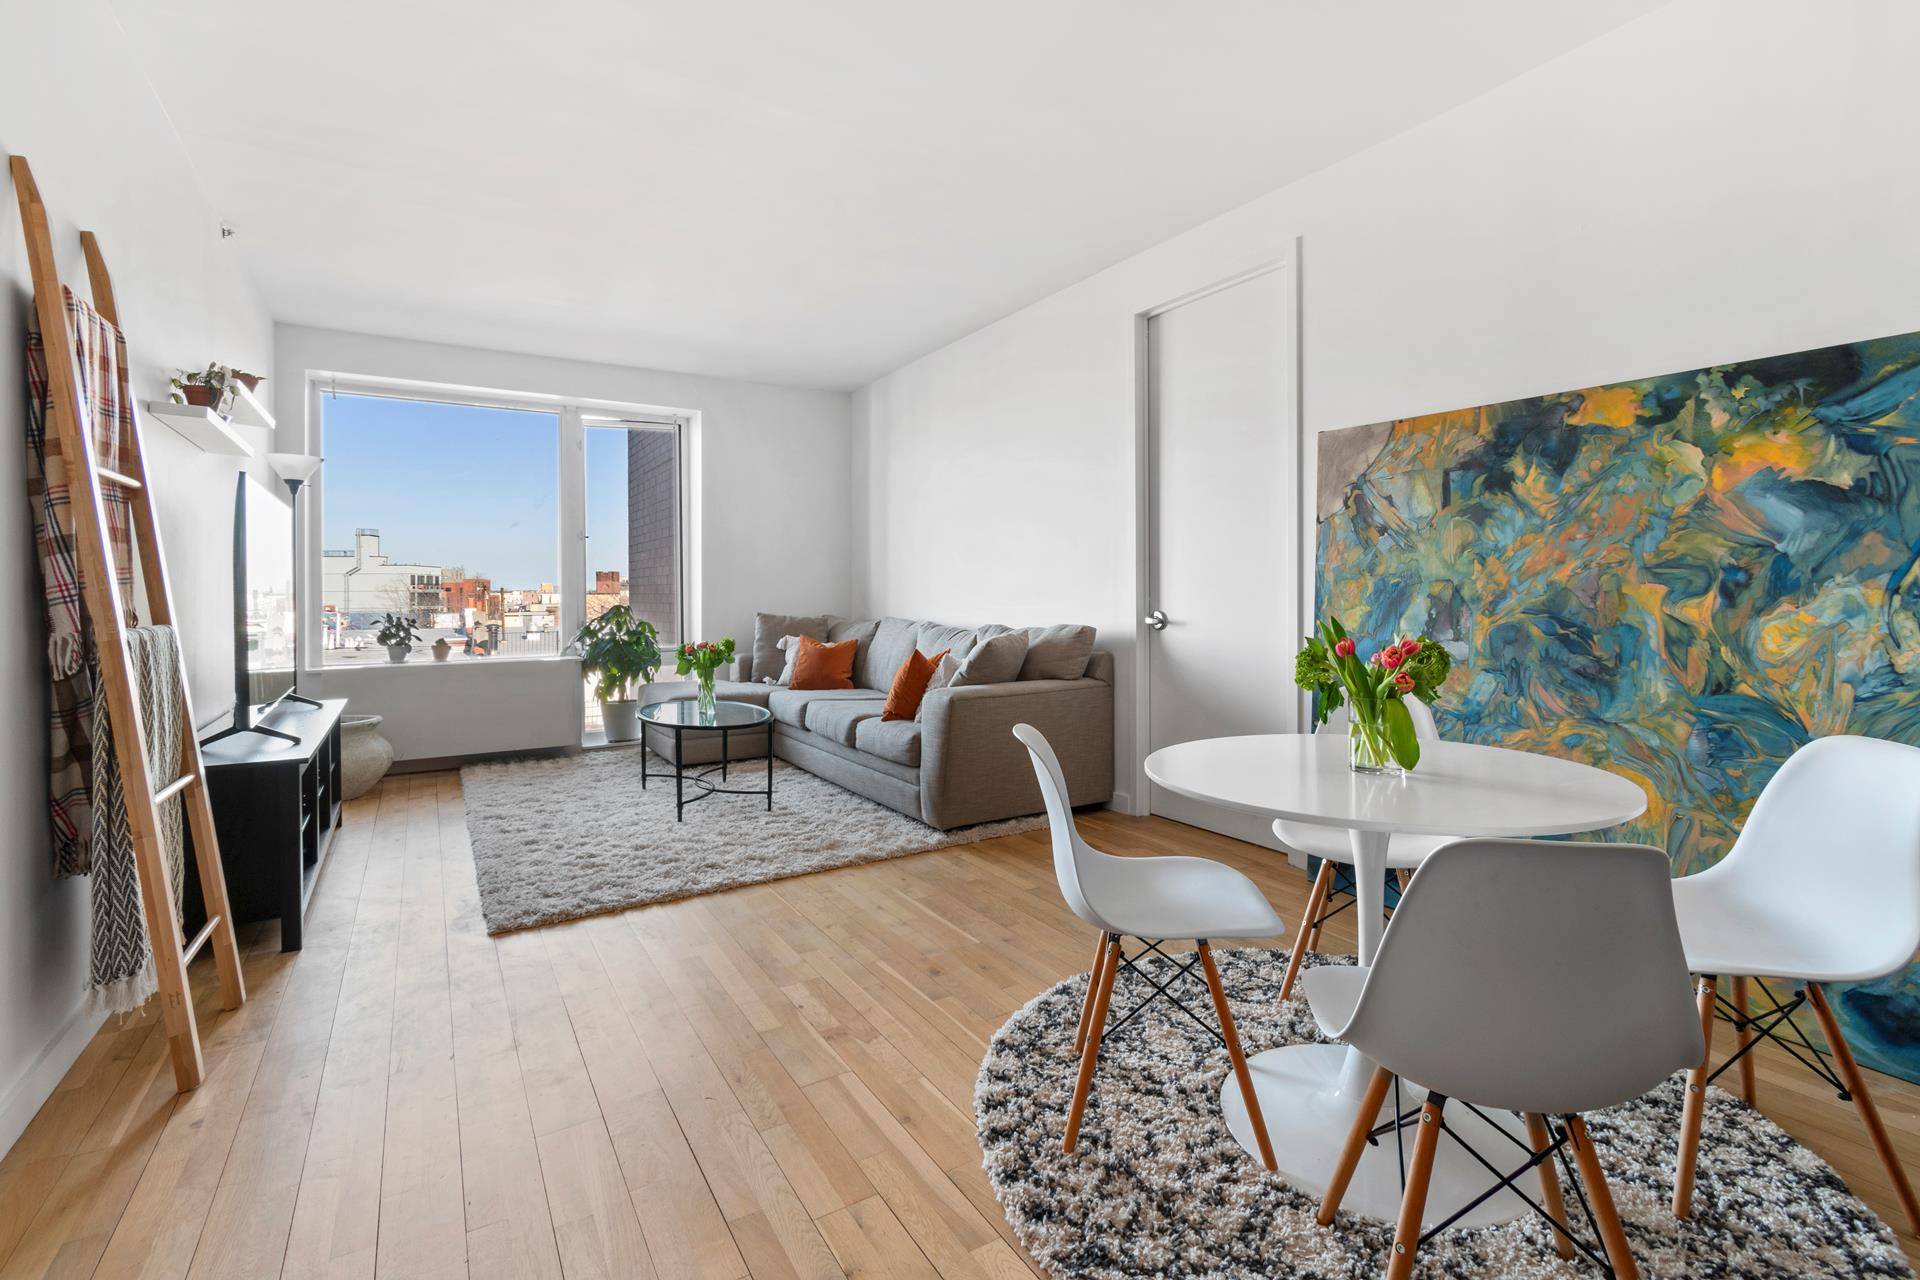 Welcome to the Isabella at 545 Washington Avenue in the heart of Clinton Hill Brooklyn area where celebrities choose to call it home.